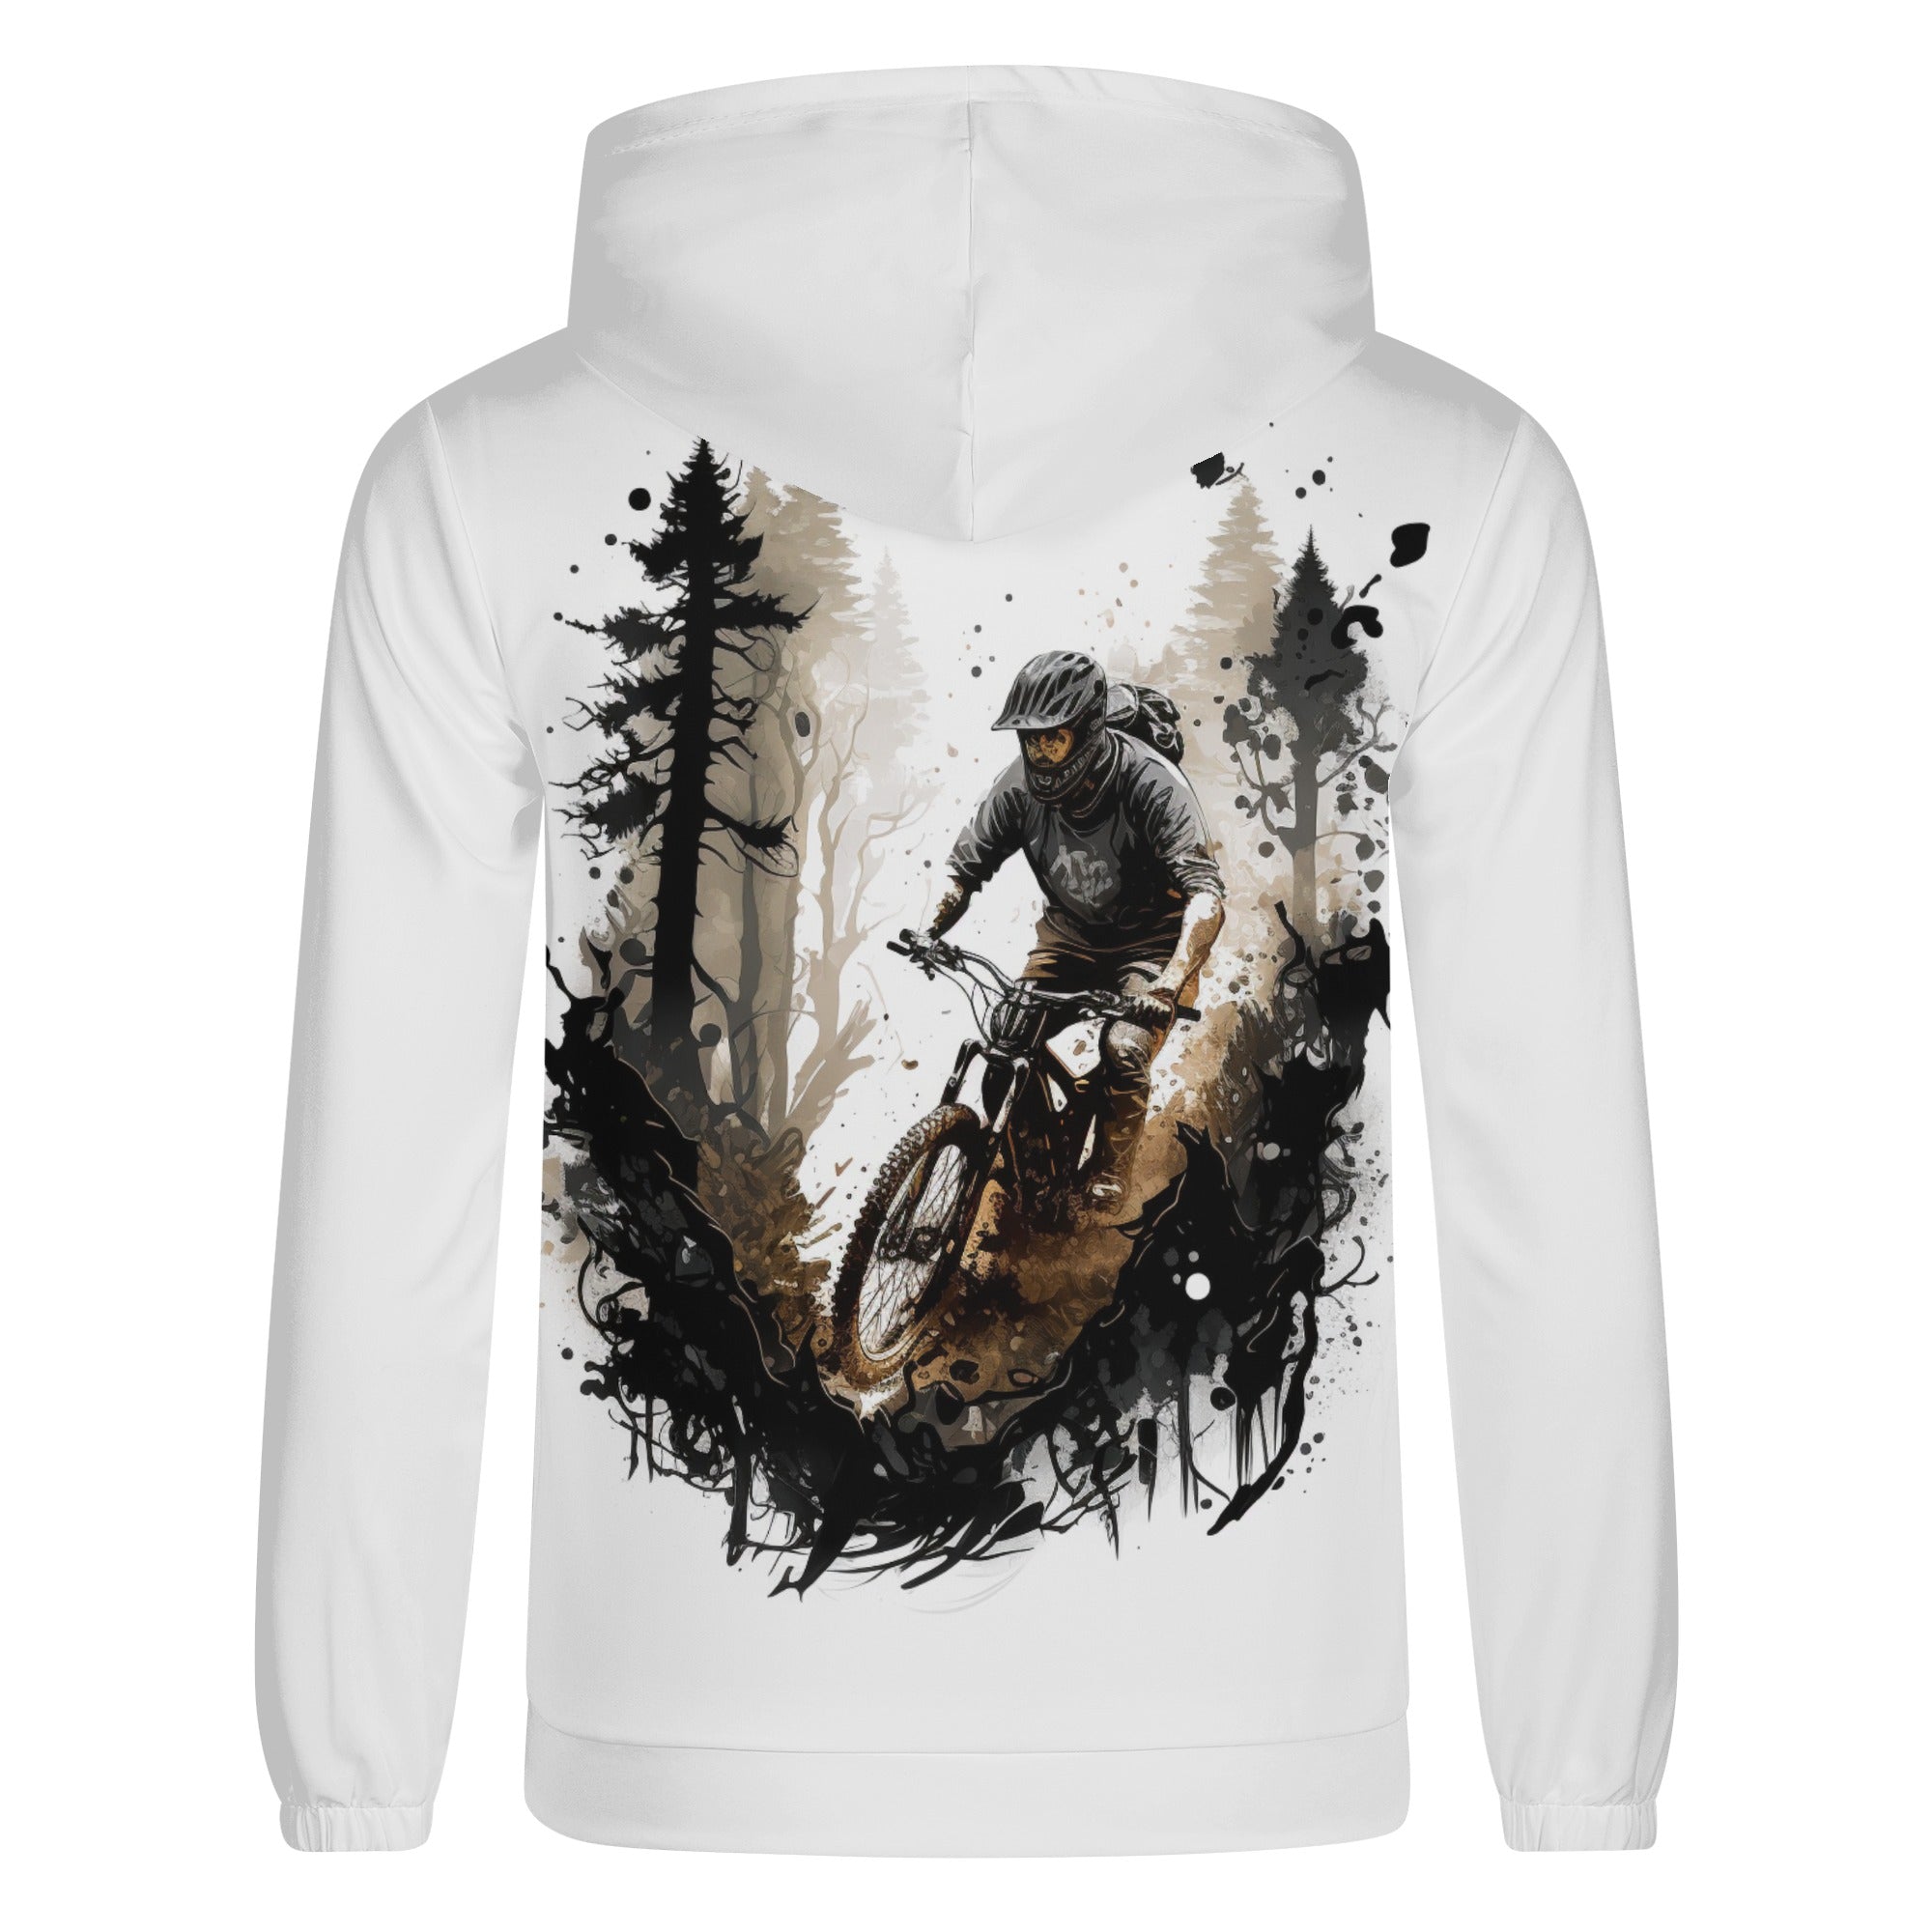 HOODIE | SINGLE TRACK DREAMER RIDER IN FOREST | WHITE | FRANT AND BACK | S - 4XL - Single Track Dreamer